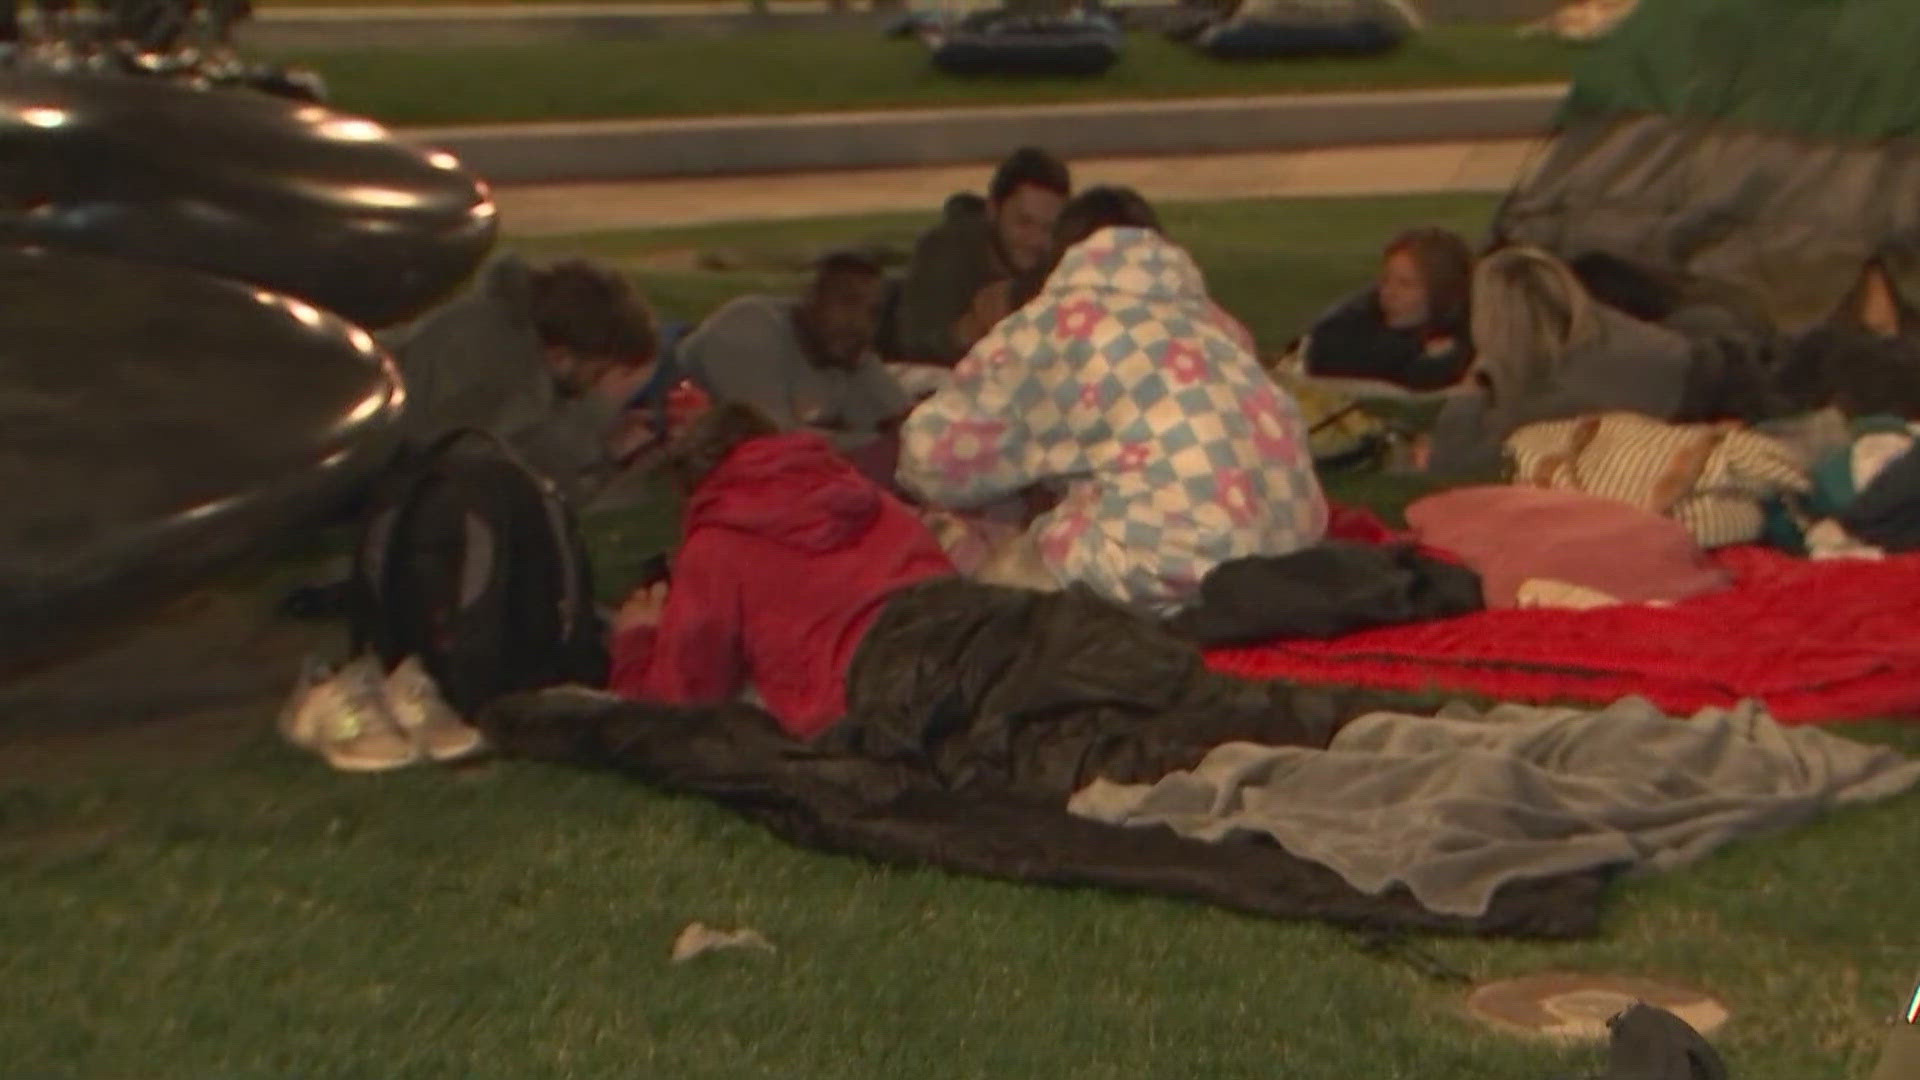 The Huckleberry Sleep Out raises money and awareness for people experiencing homelessness in central Ohio.